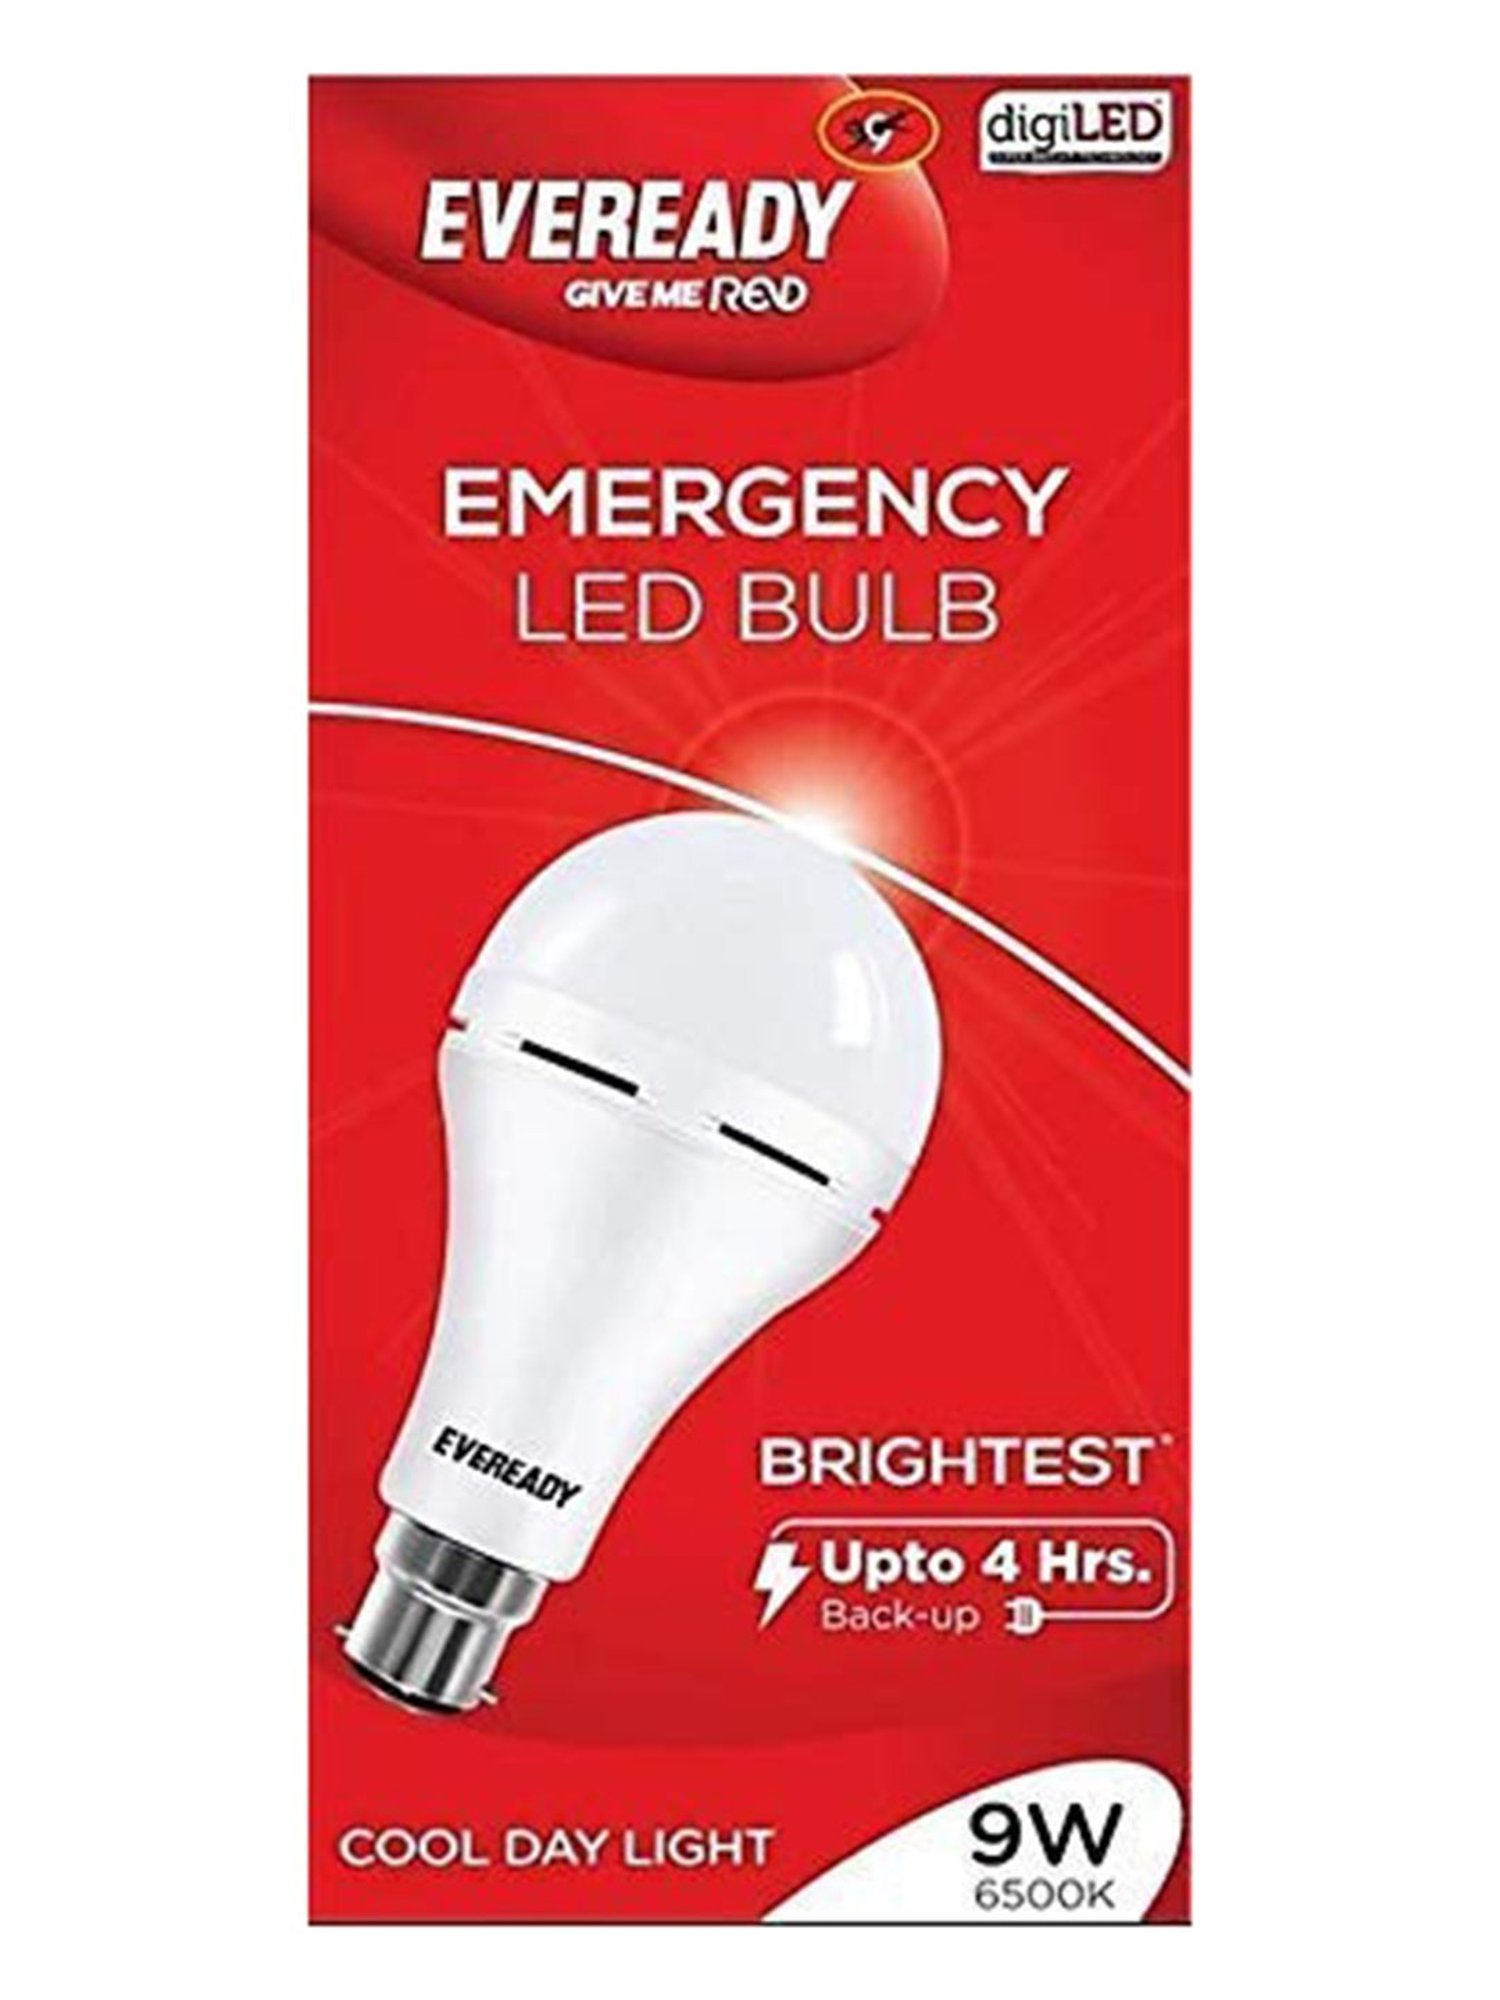 Eveready launches TVC Kya Baat hai for its Emergency LED bulb 'INSTACHARGE'  - Brand Wagon News